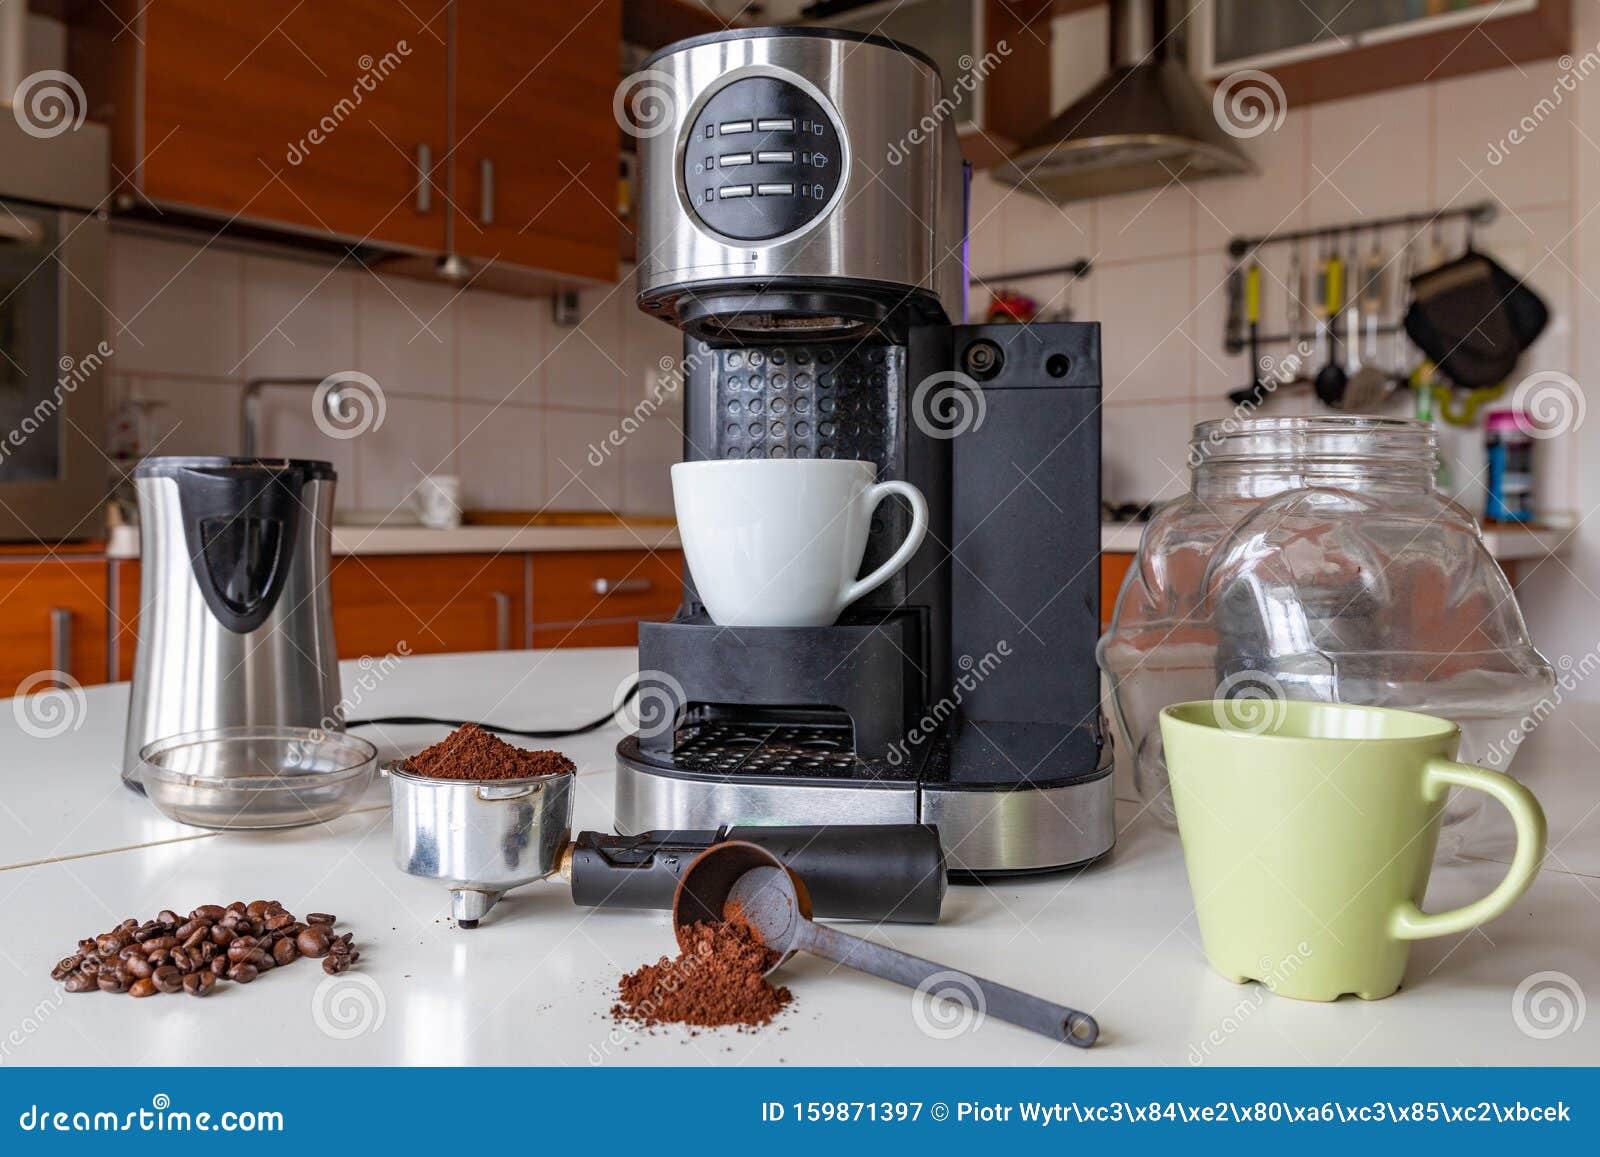 syndrom Mission fest Making Tasty Coffee in the Home Kitchen. Coffee Maker and Accessories  Needed To Prepare it Stock Image - Image of cooking, espresso: 159871397